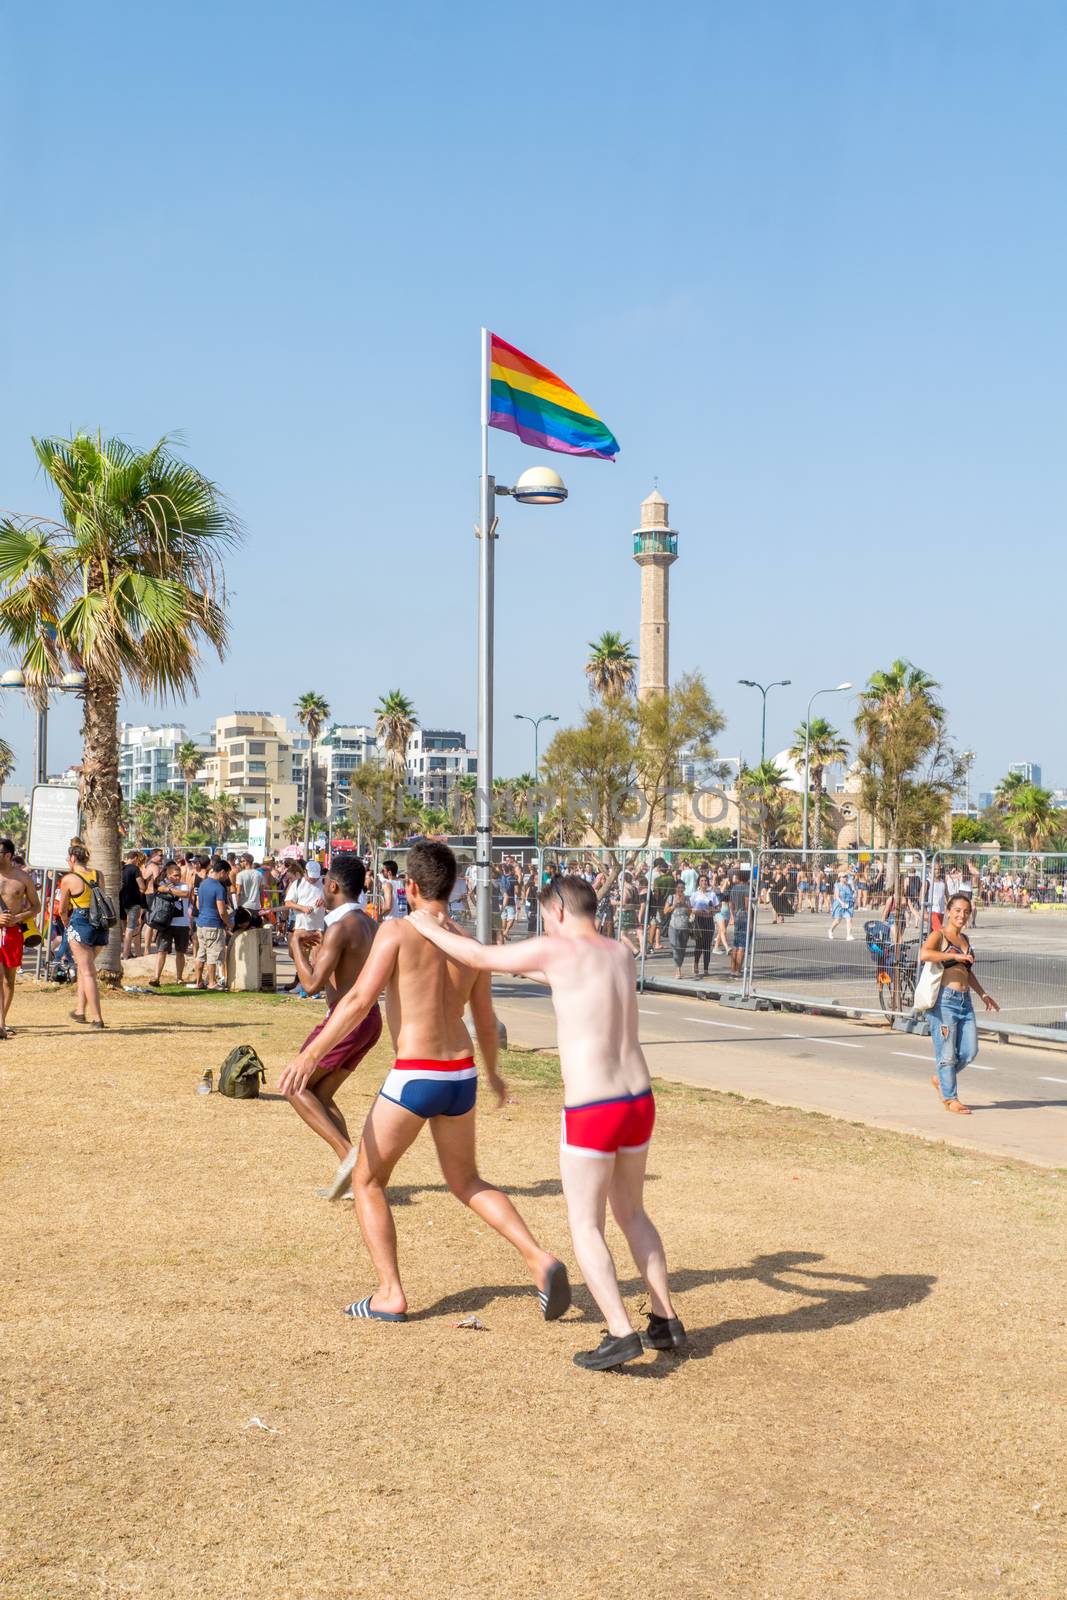 TEL-AVIV, ISRAEL - JUNE 08, 2018: Various people celebrate, the minaret of Hassan Bek Mosque and a rainbow flag, part of the annual pride parade of the LGBT community, in Tel-Aviv, Israel